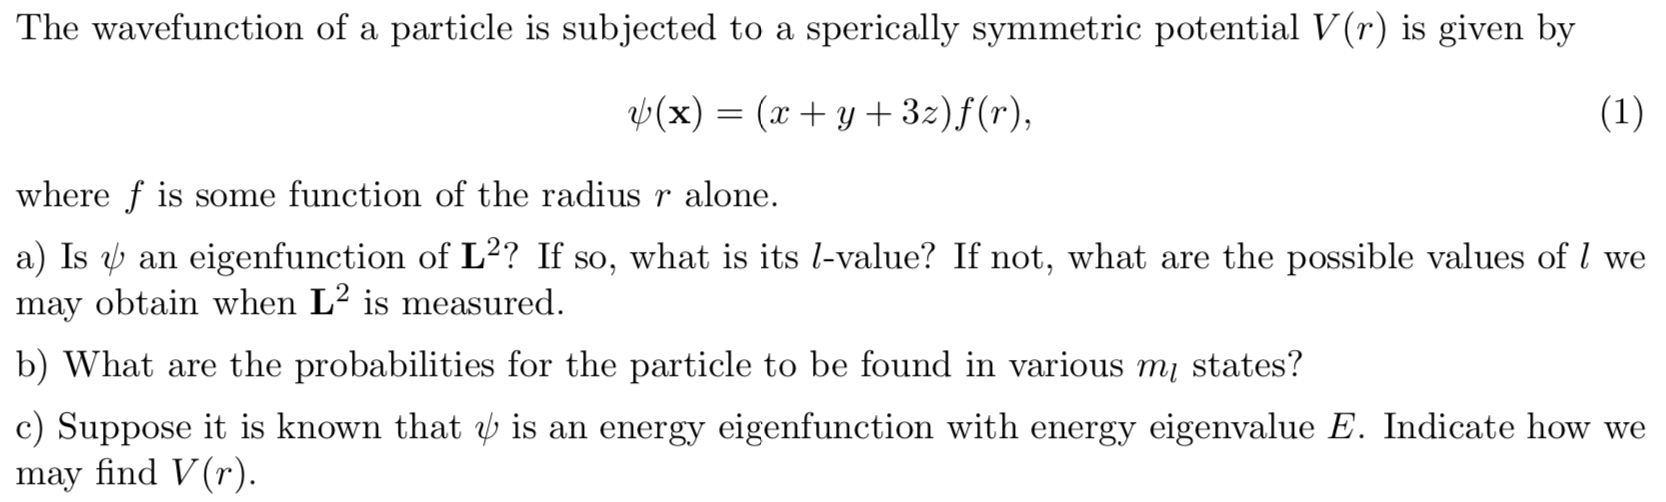 The wavefunction of a particle is subjected to a sperically symmetric potential V (r) is given by
(x) = (x + y + 3z)f(r),
(1)
where f is some function of the radius r alone.
a) Is y an eigenfunction of L²? If so, what is its l-value? If not, what are the possible values of l we
may obtain when L² is measured.
b) What are the probabilities for the particle to be found in various m states?
c) Suppose it is known that ý is an energy eigenfunction with energy eigenvalue E. Indicate how we
may find V(r).
